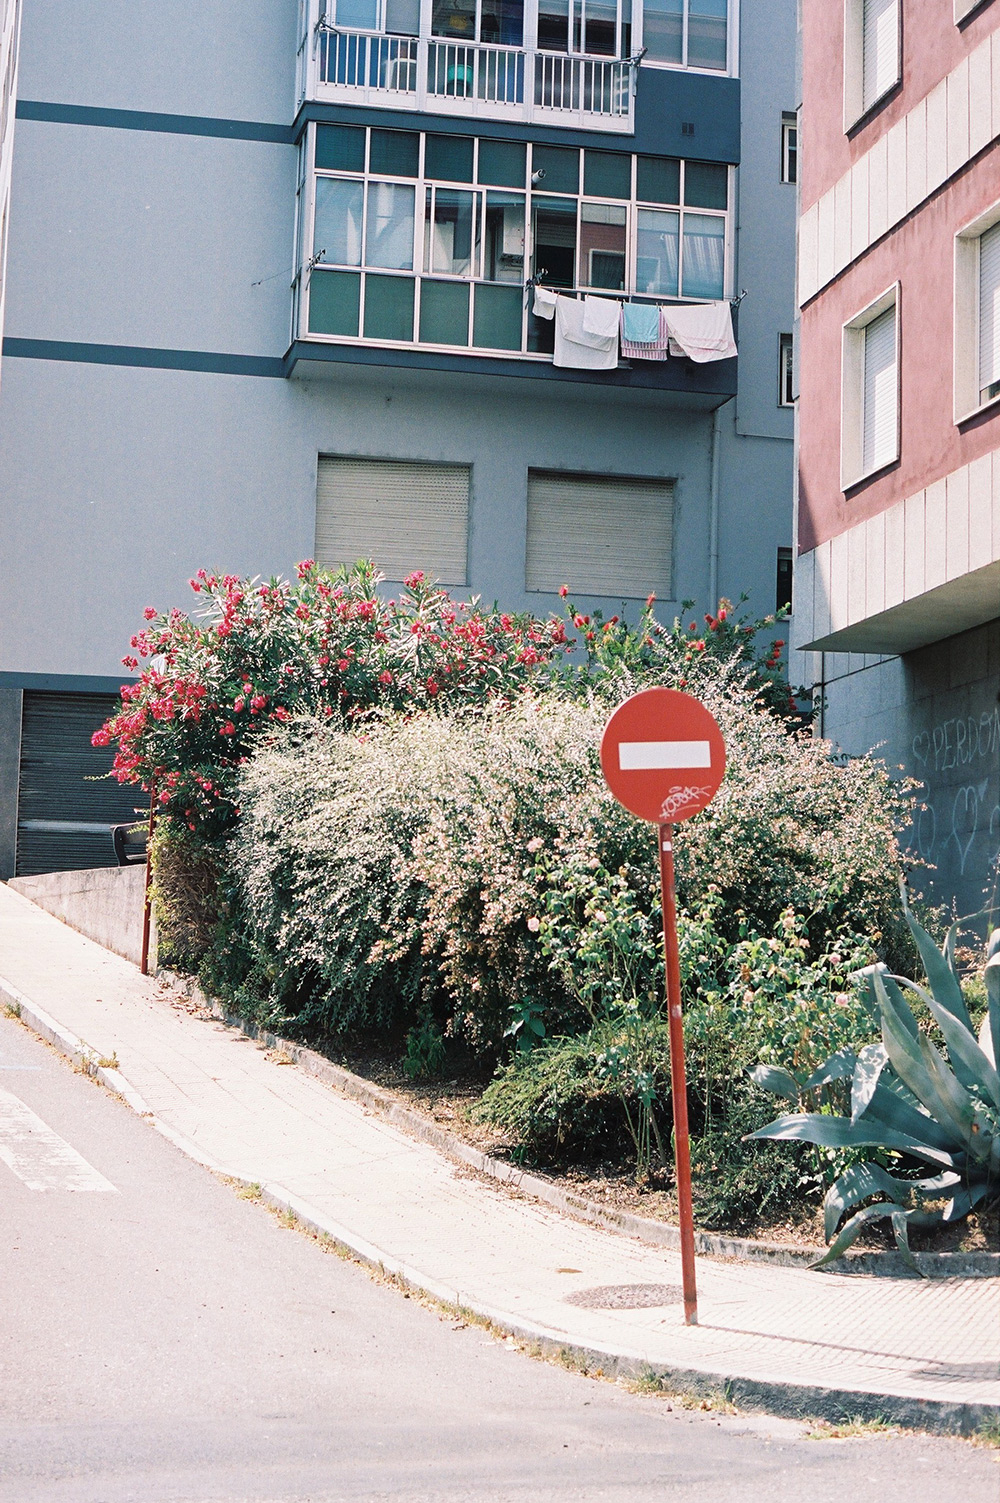 Analog photo of a 'No Entry' sign at a street corner with bushes and flowers.